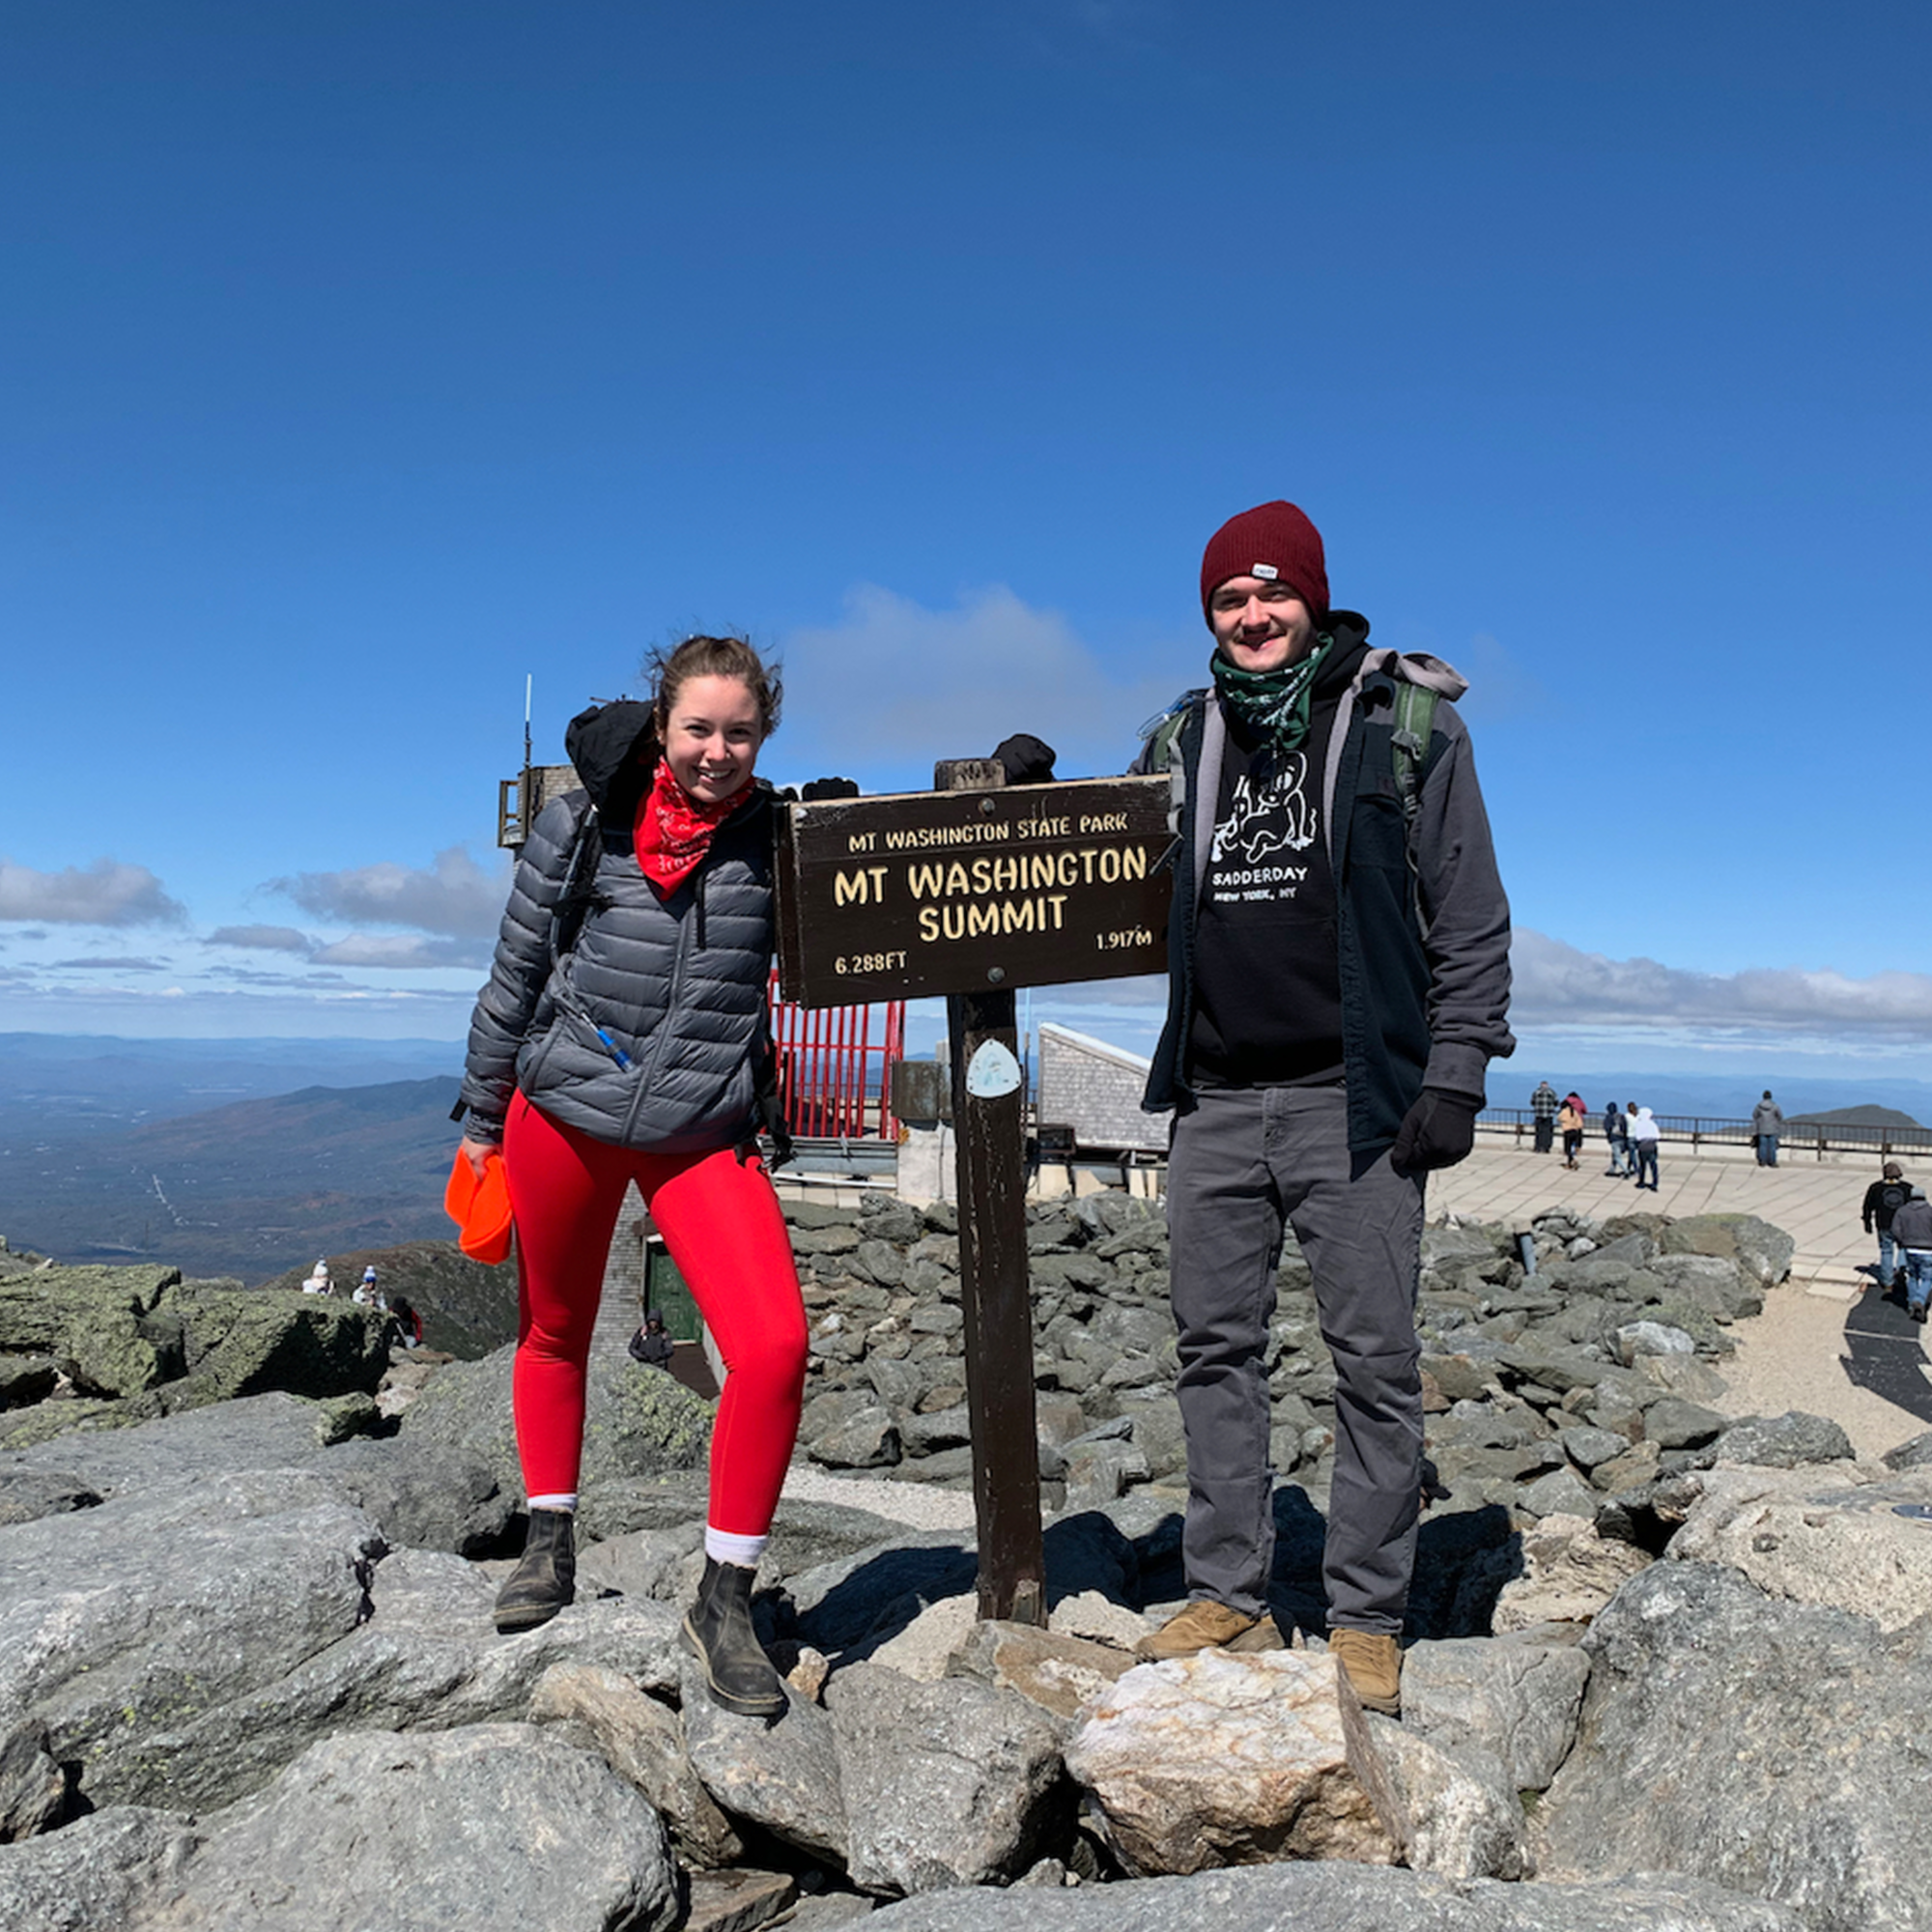 Our very first hike together up Mount Washington on September 19, 2020